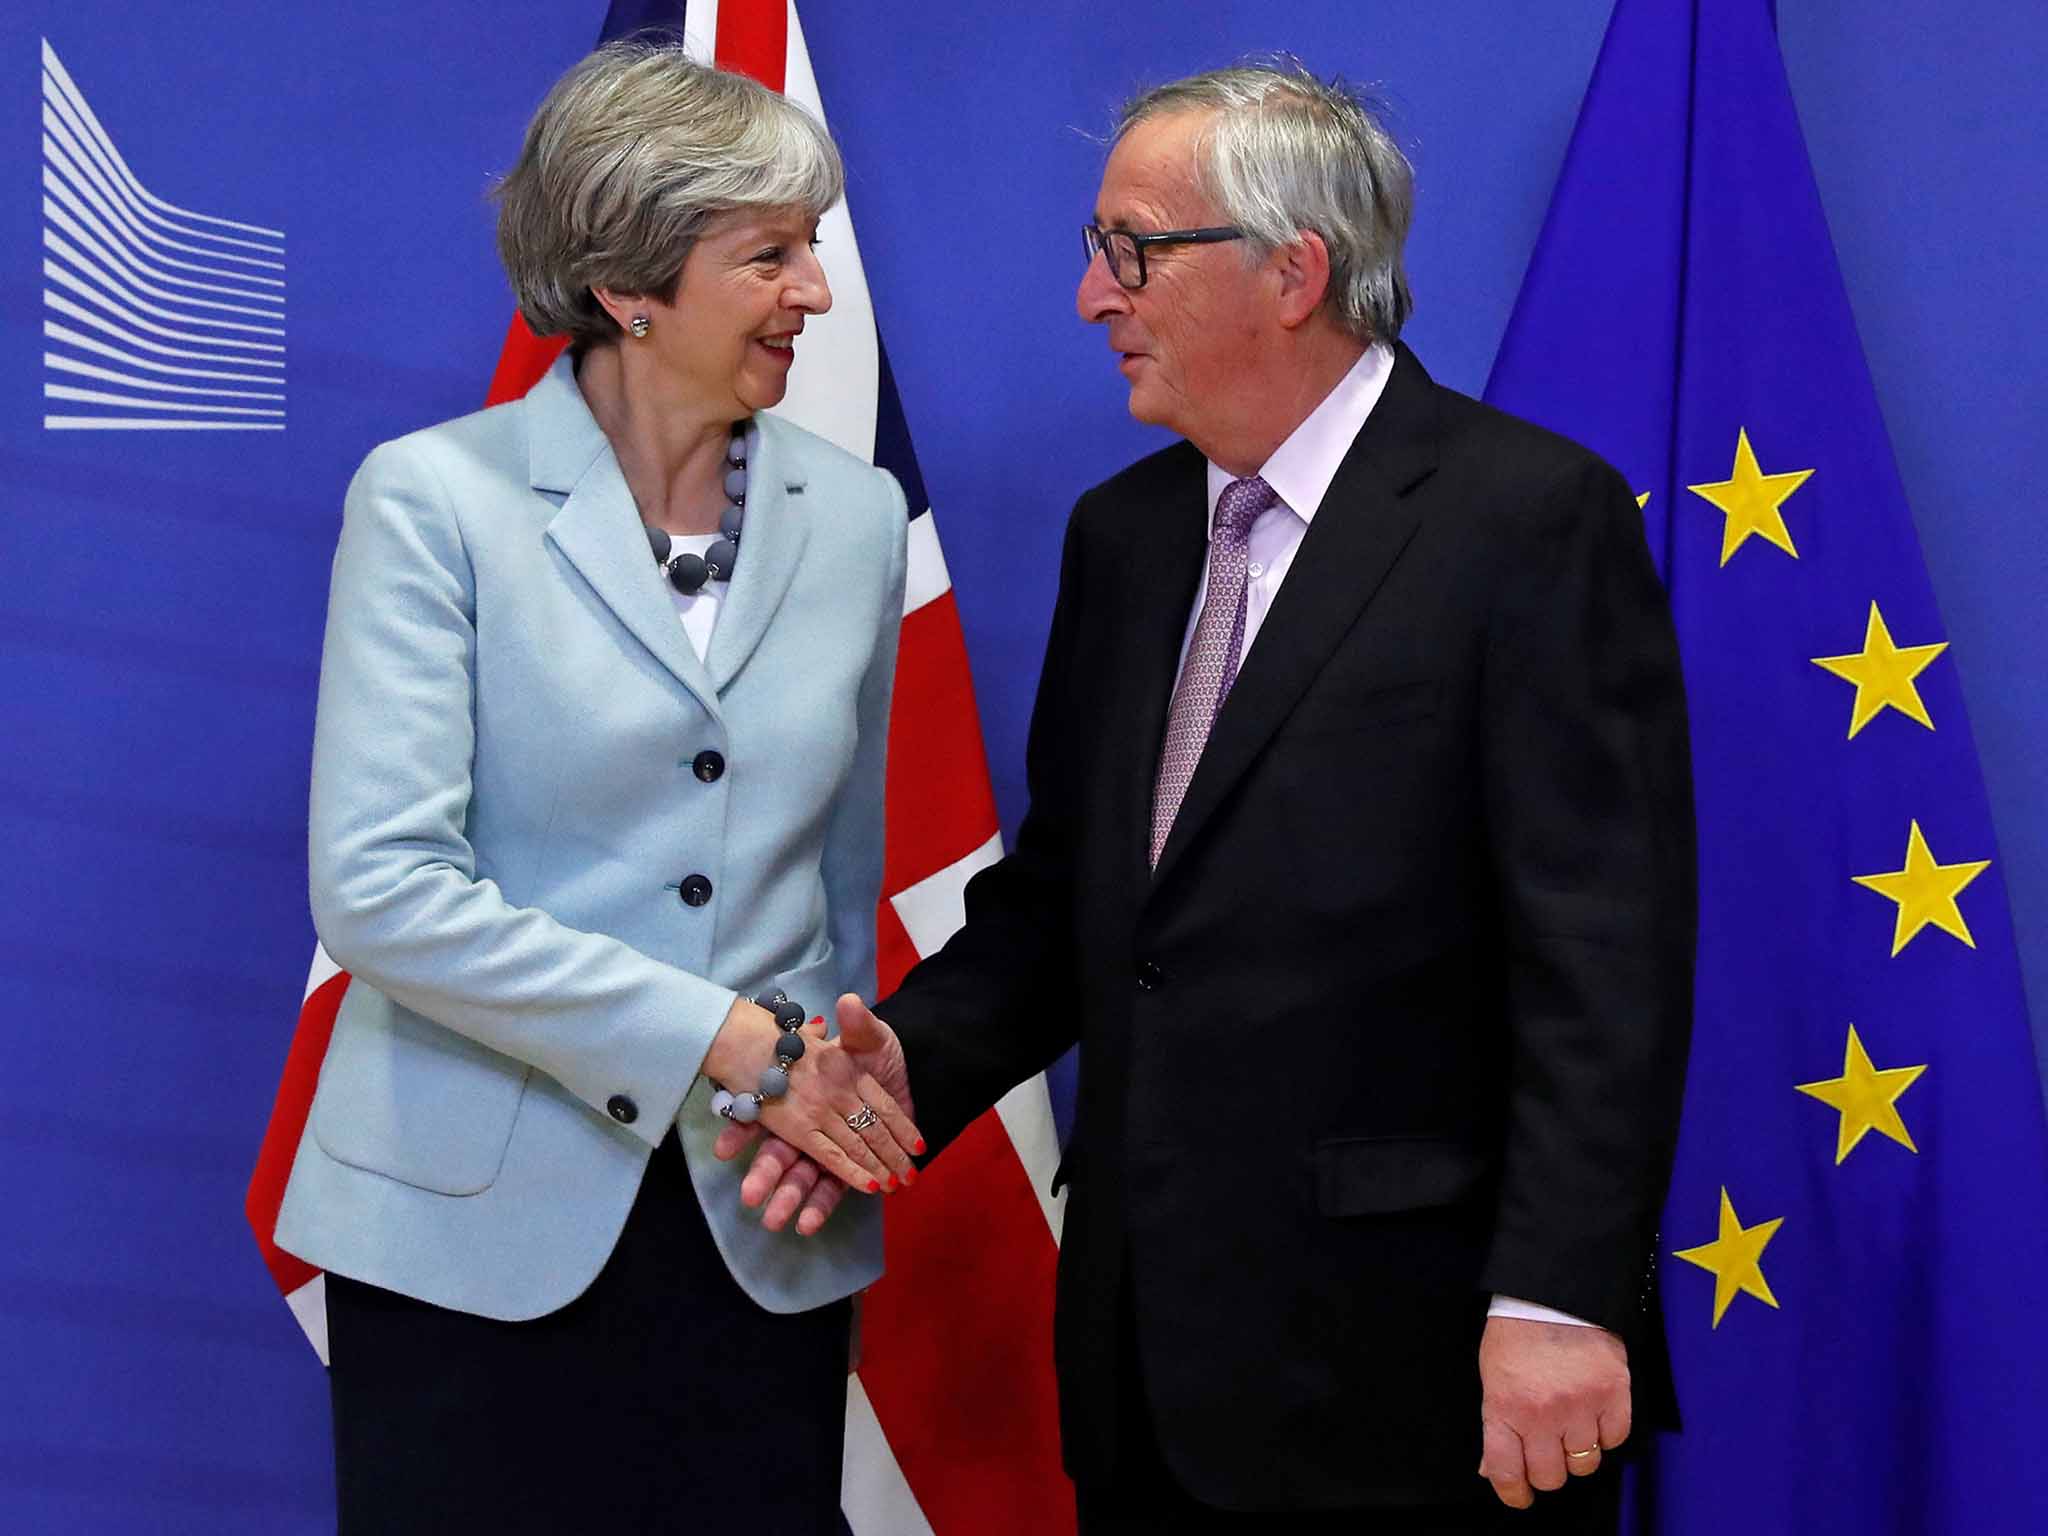 Theresa May shakes hands with EC President Jean-Claude Juncker as both parties agree to move onto trade talks